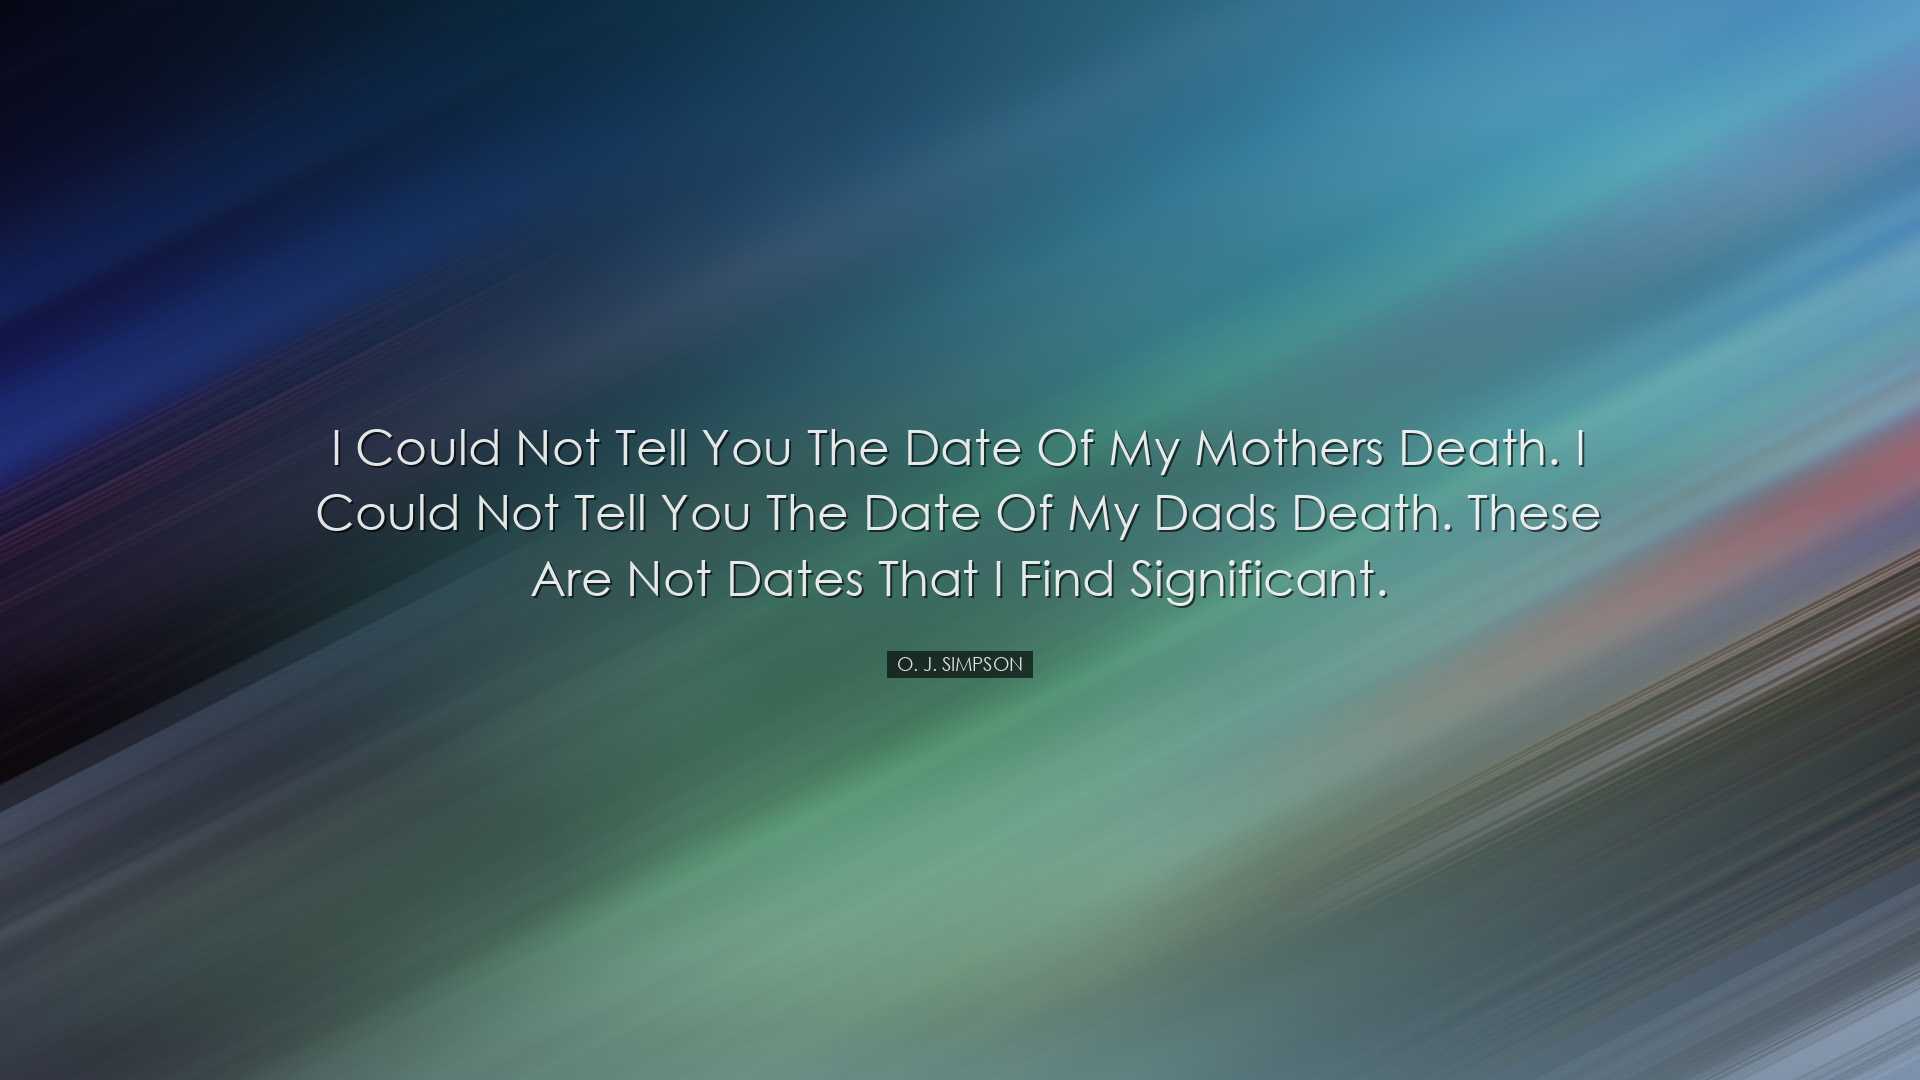 I could not tell you the date of my mothers death. I could not tel